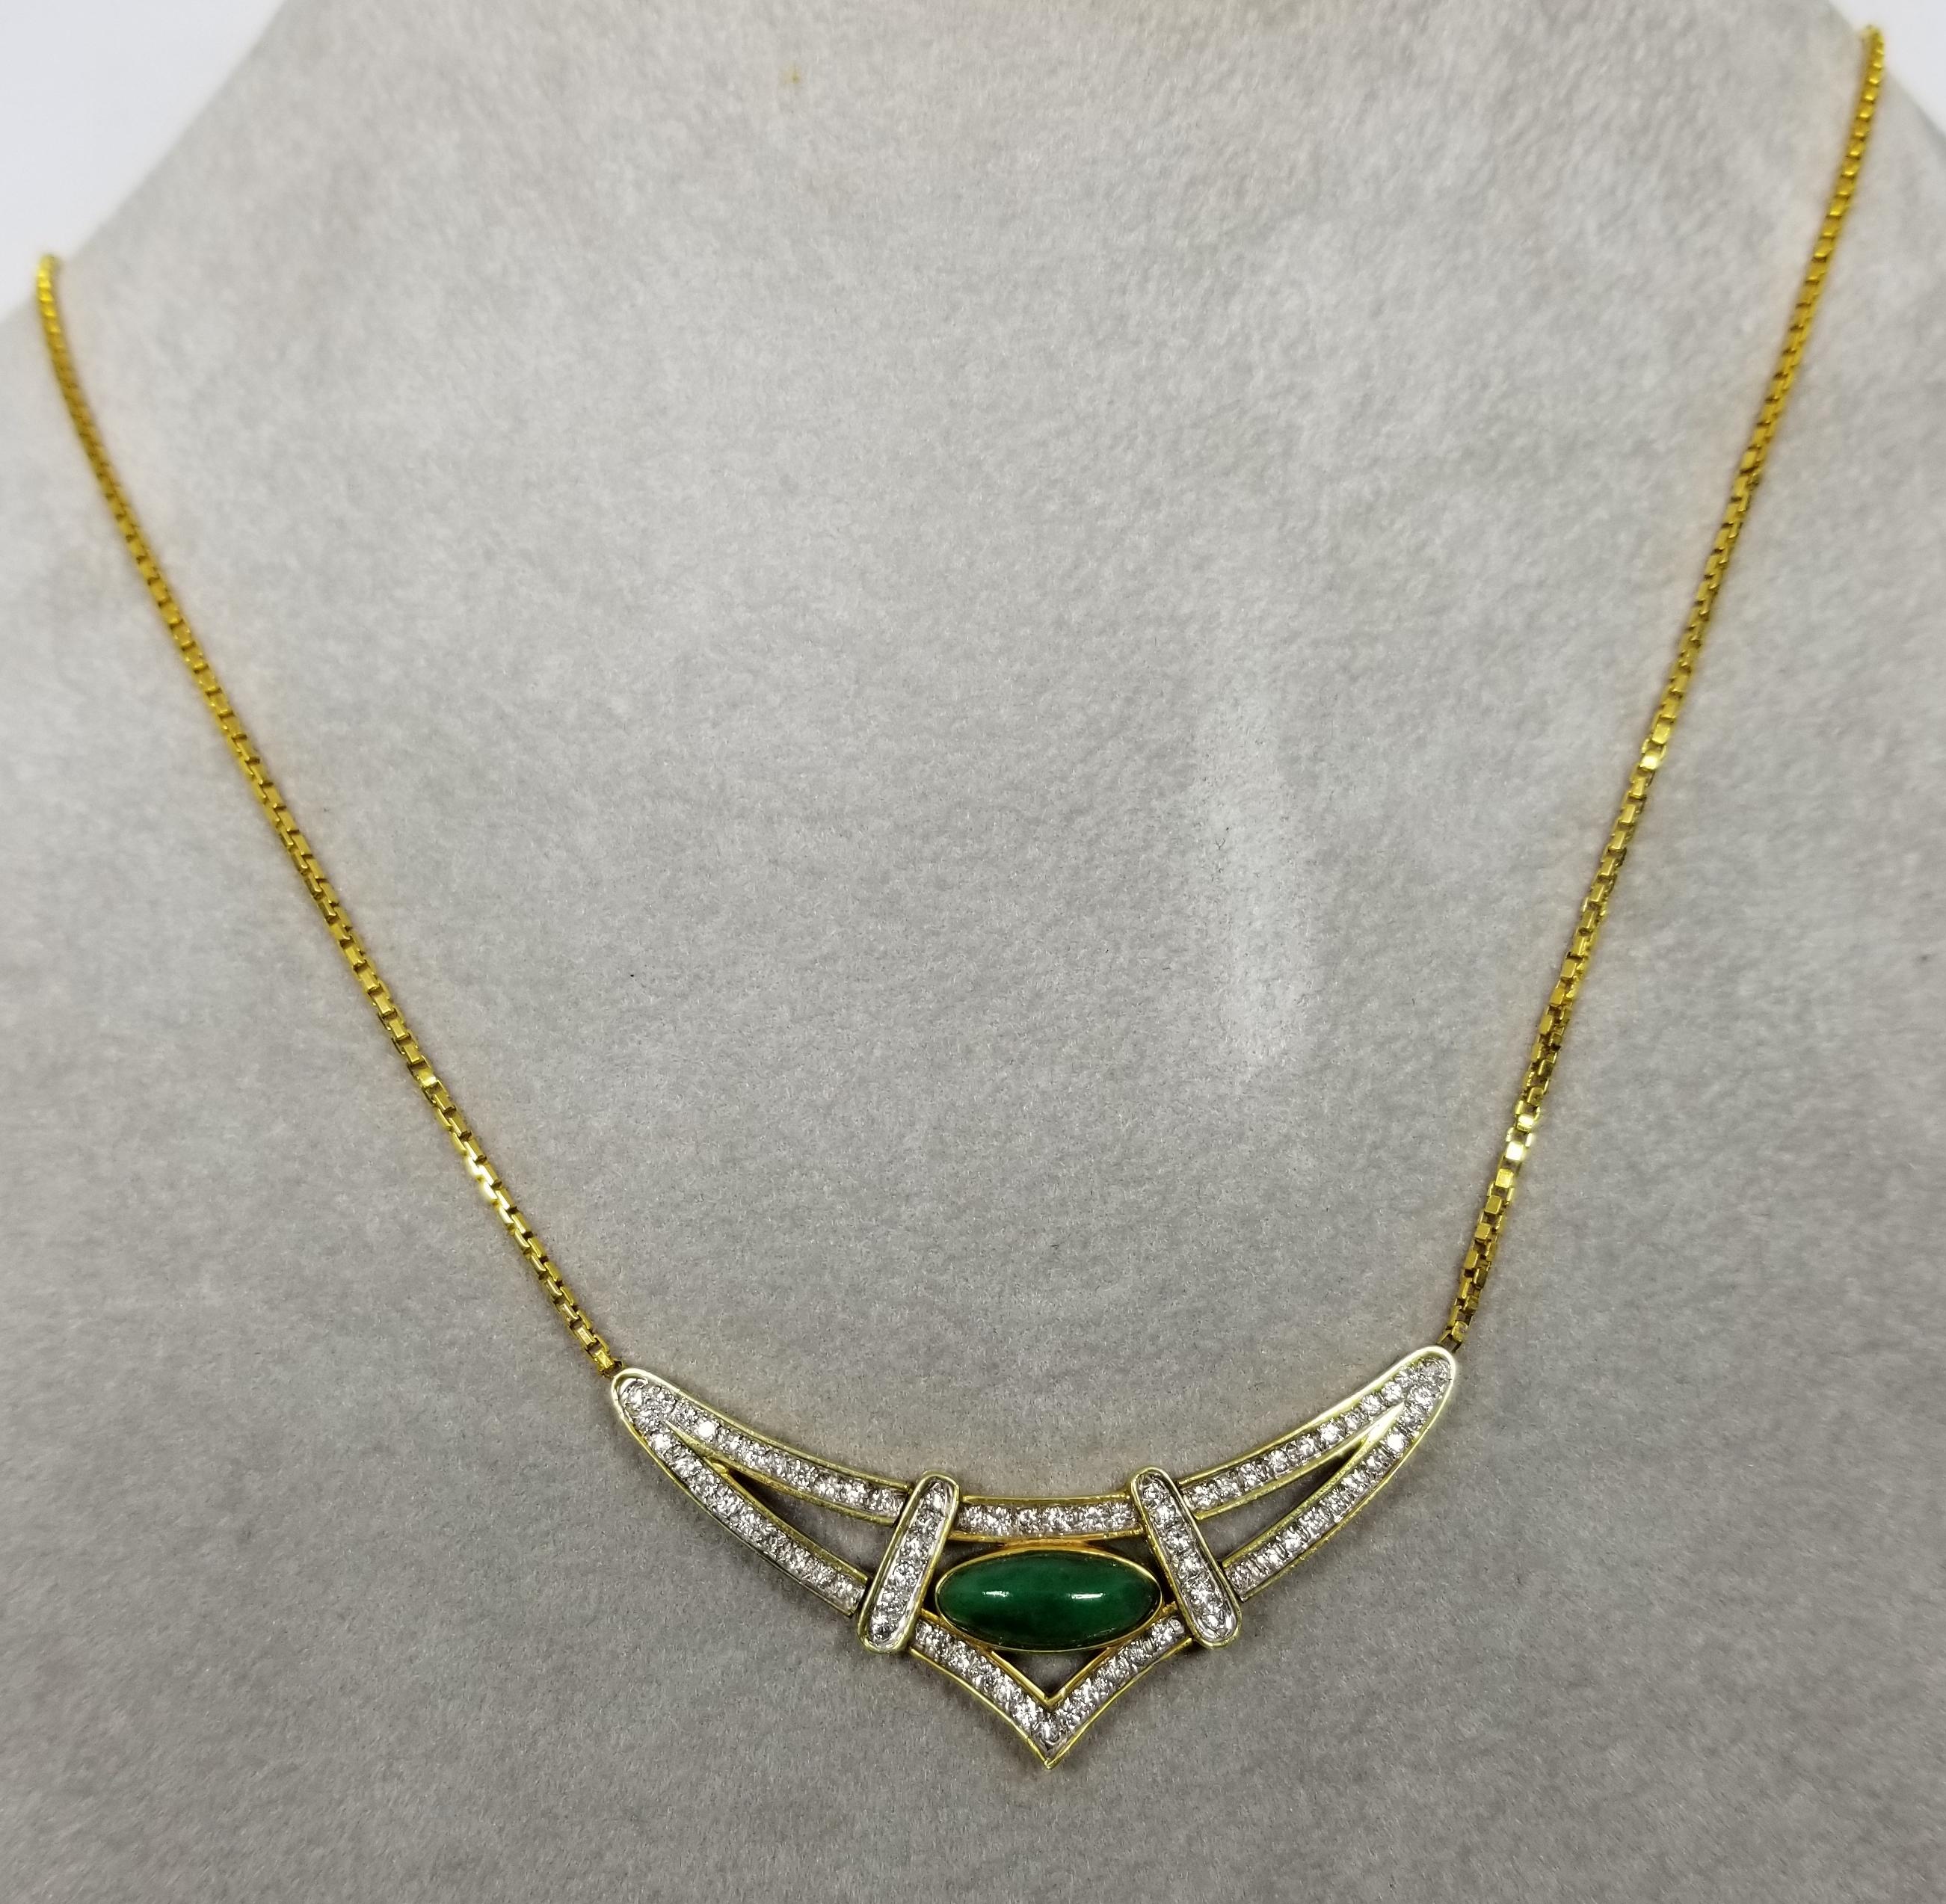 This piece of fine jewelry was designed and hand crafted by “Moshi” of New York, it was found in a vault from an estate sale and was never used.  14k yellow gold jade and diamond pendant, containing 1 oval cabochon jade13 x 5.5mm and 78 round full